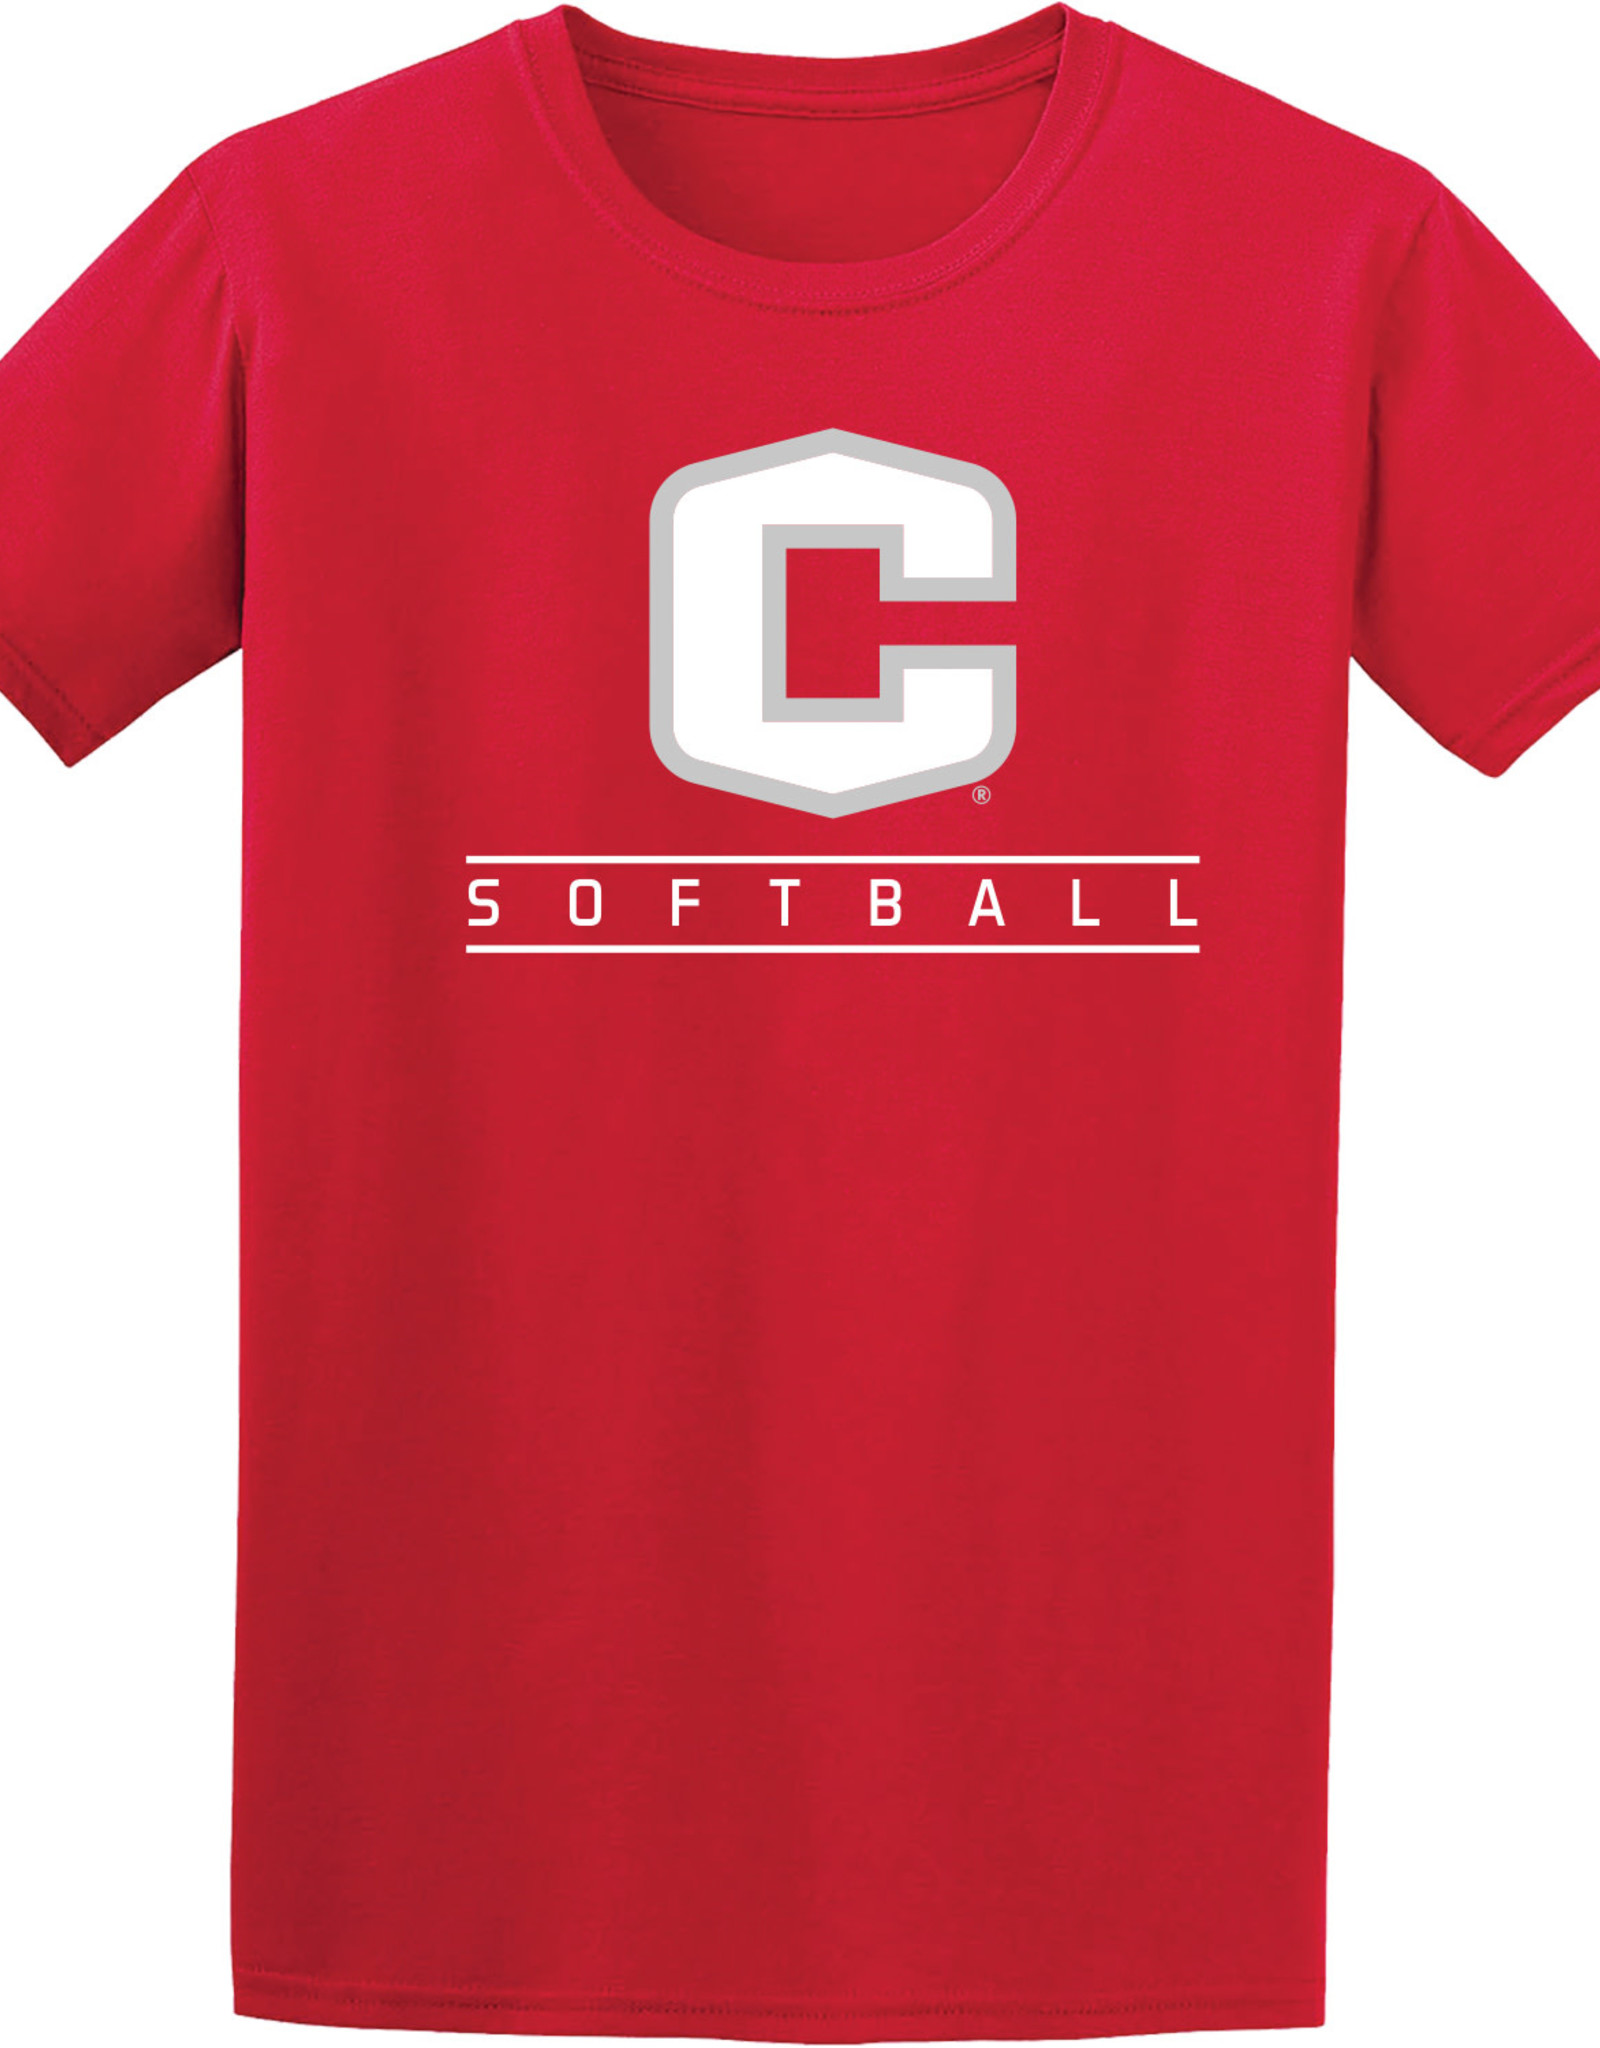 College House College House Softball Tee Red